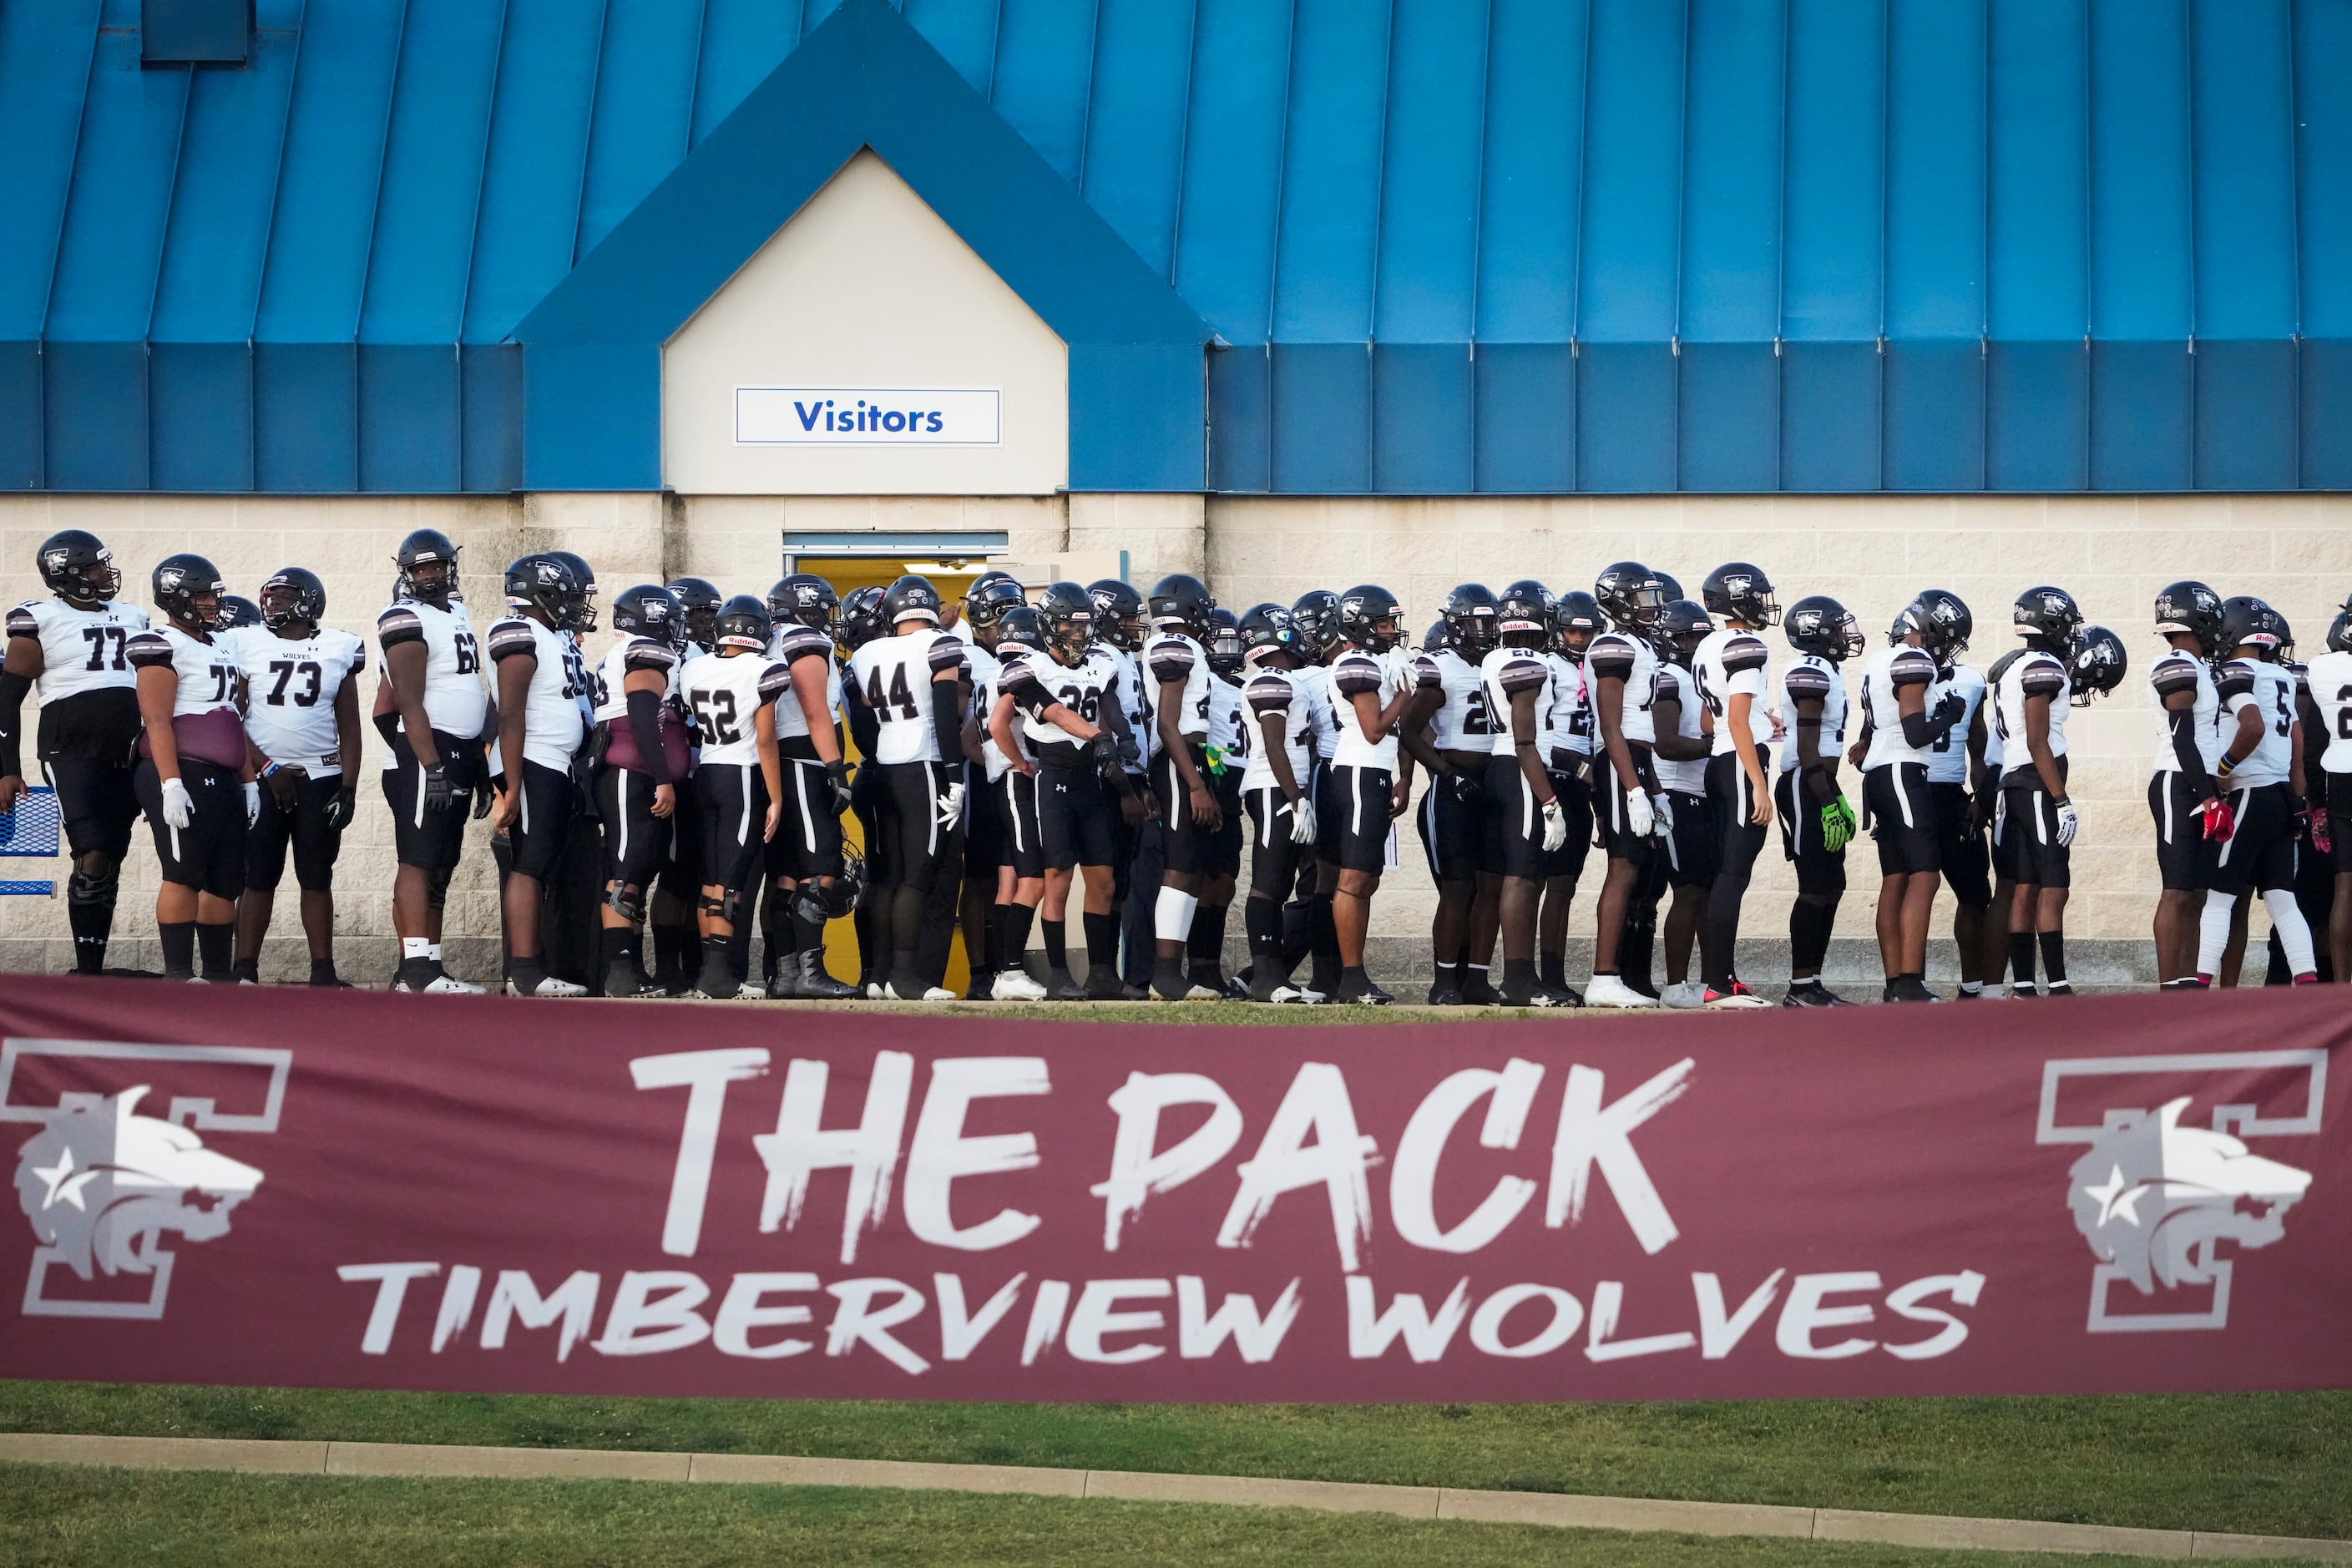 Mansfield Timberview wait to take the field before facing Waco University in a high school...